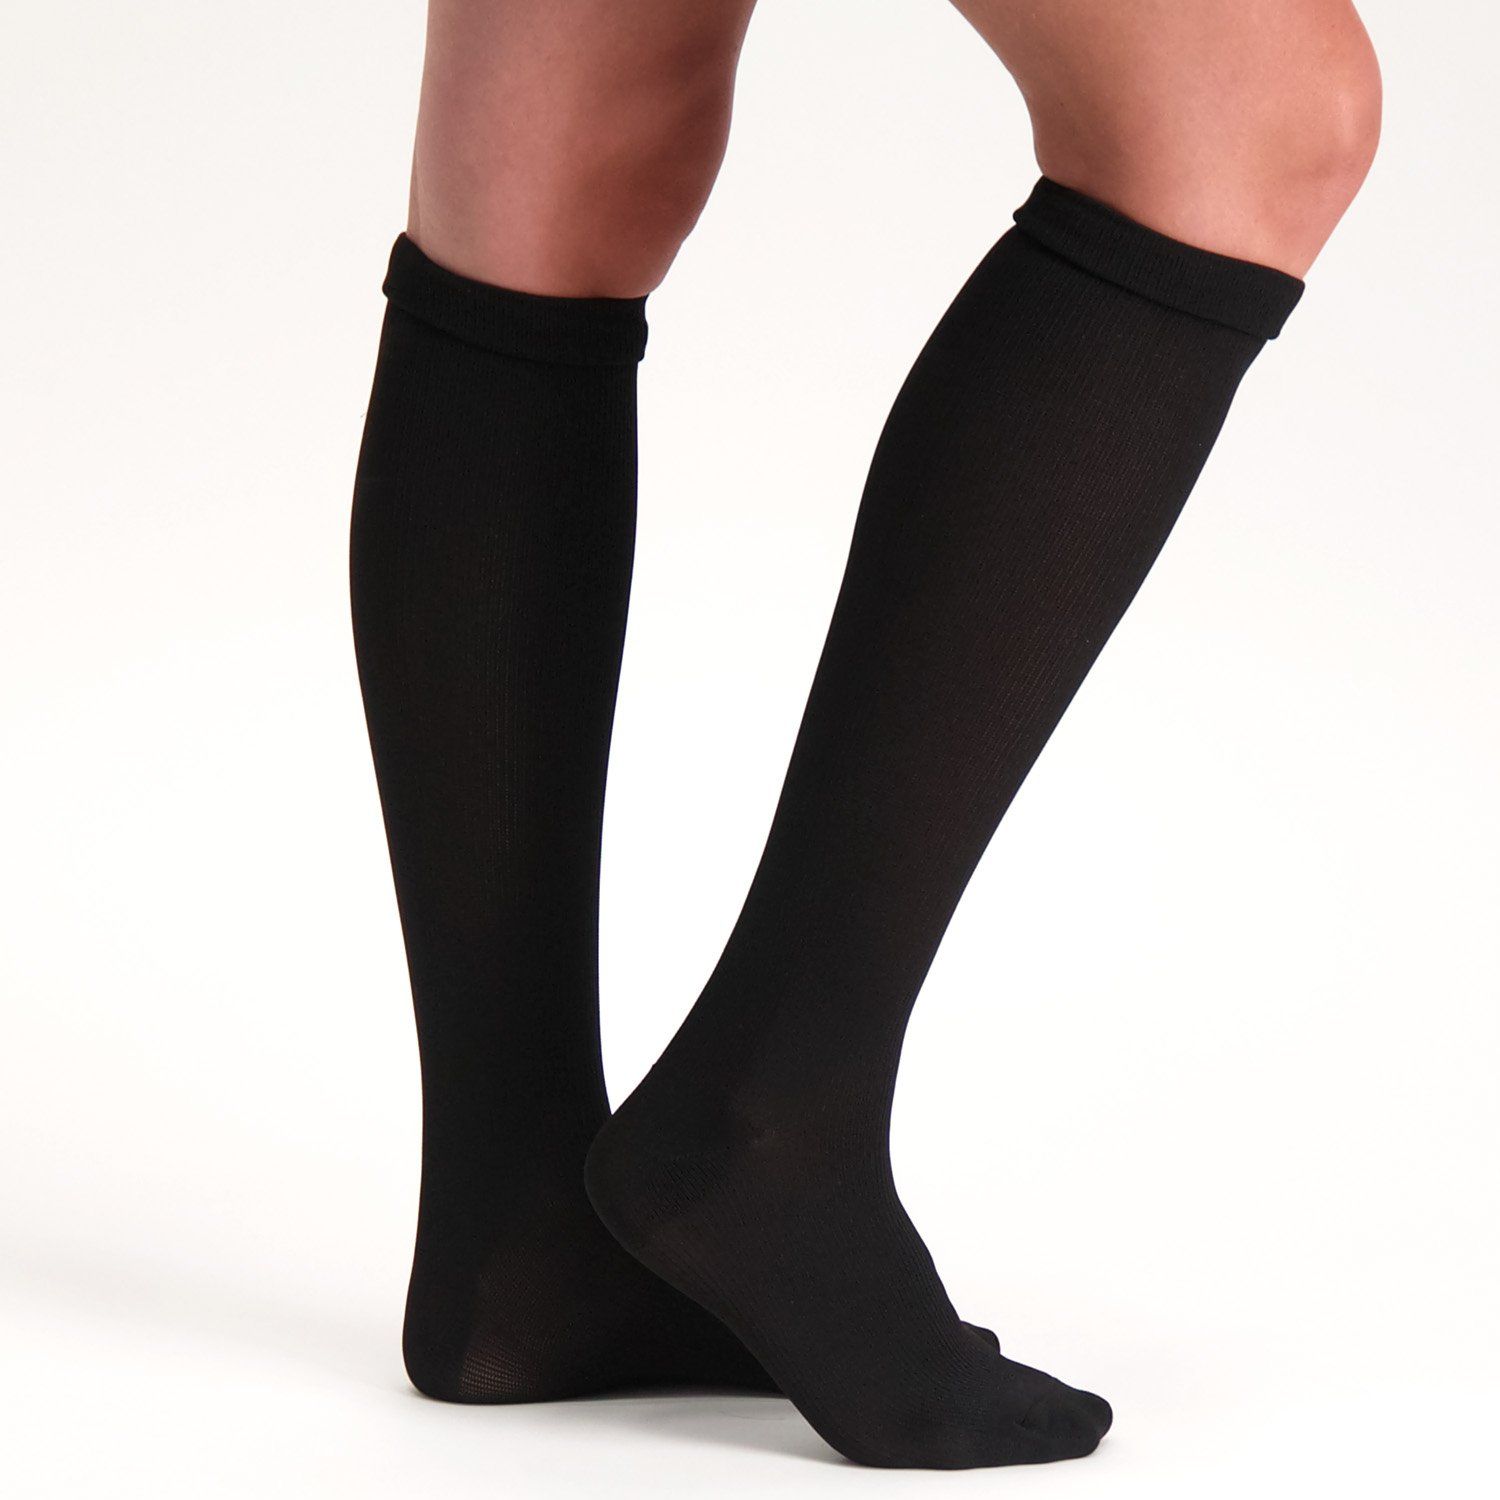 Support Stockings / Travel Stockings - Closed Toe